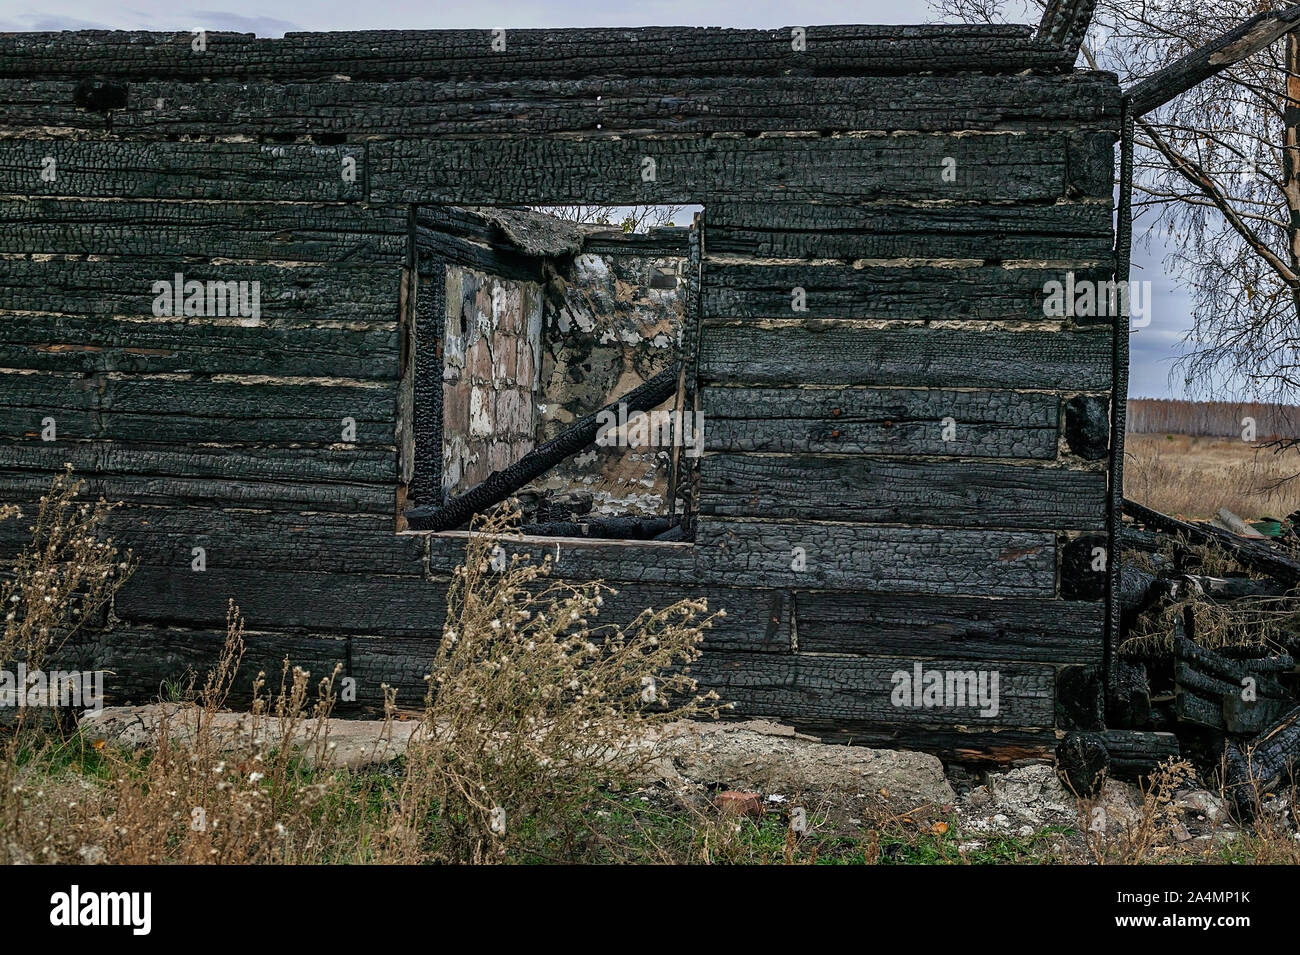 Burnt wooden house. Destroyed roof and windows, charred walls. Horizontal shot Stock Photo